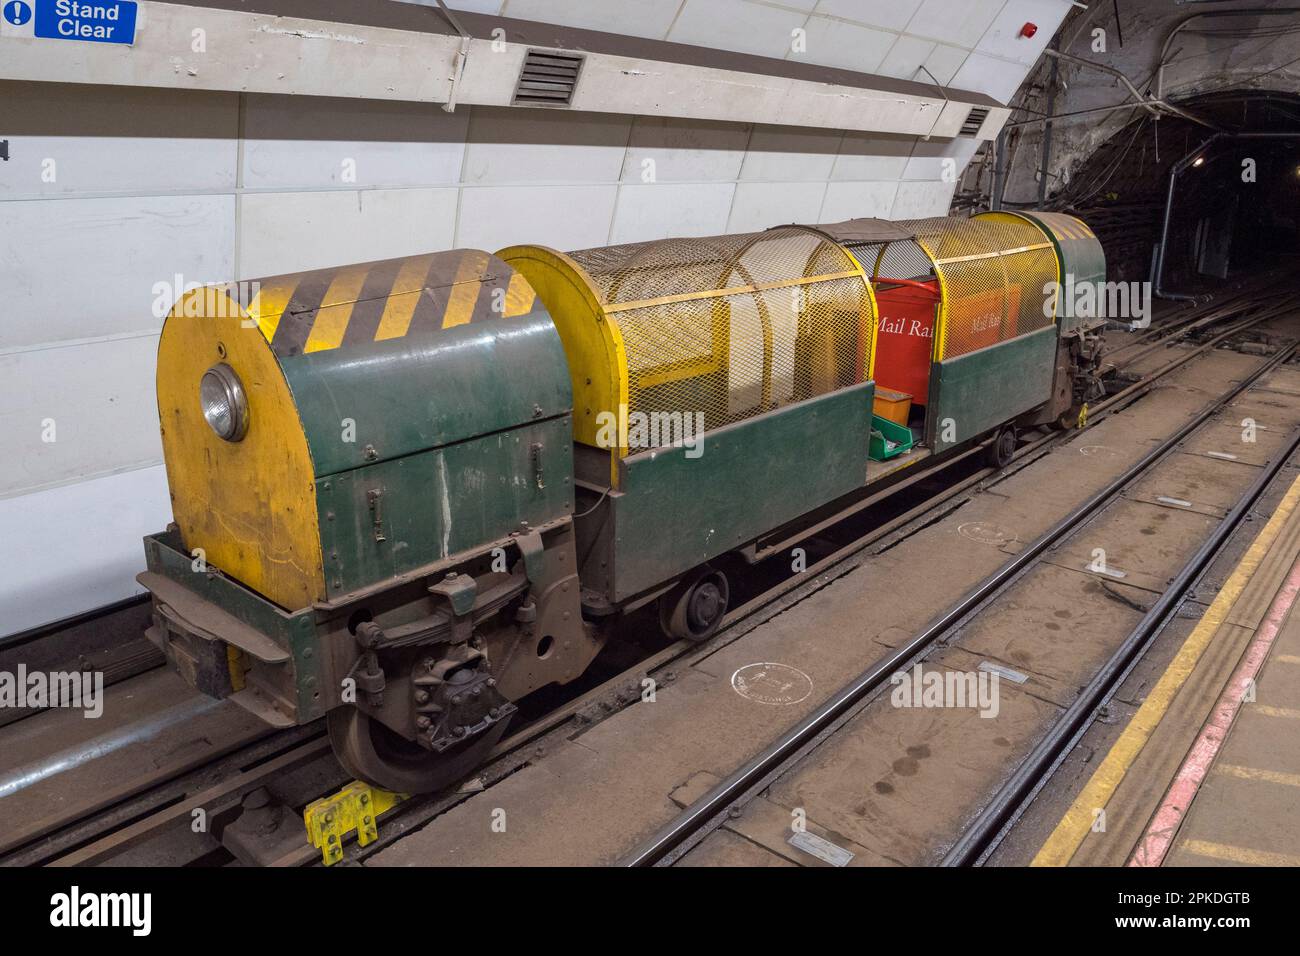 An original miniature train at Mail Rail, the former Post Office Railway system under the streets of central London, UK. Stock Photo